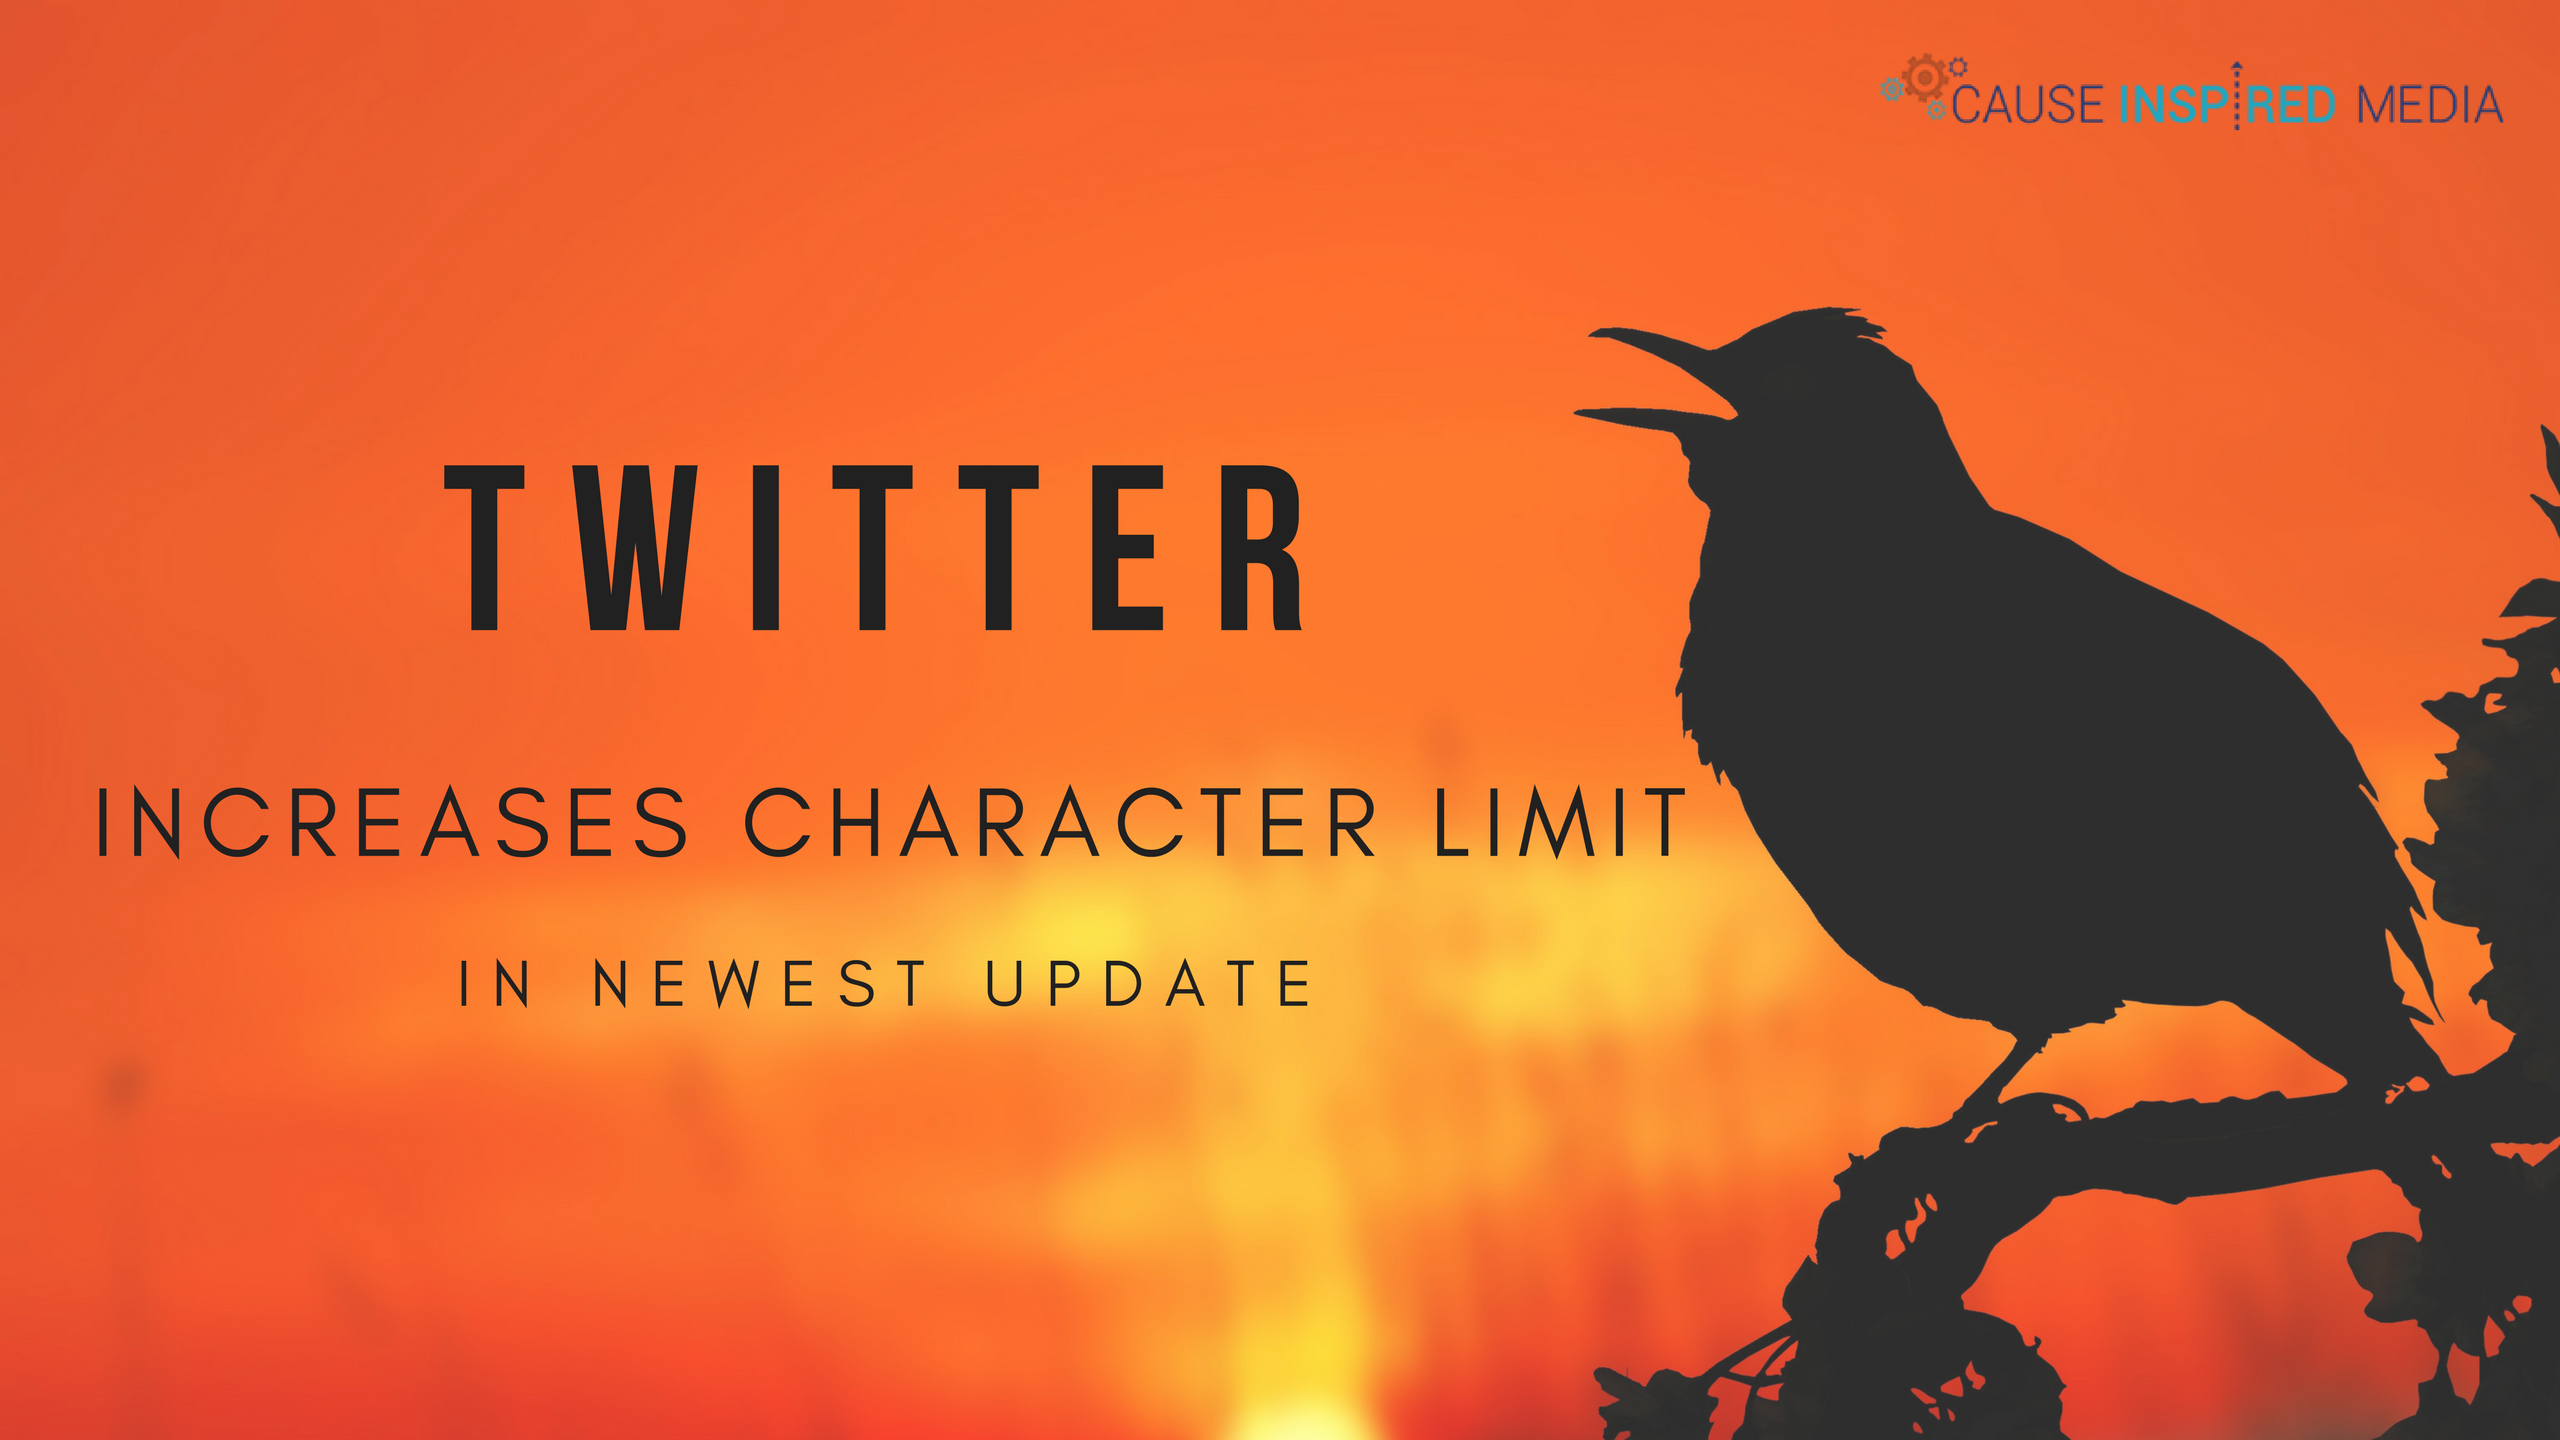 Cause Inspired Media Twitter Increases Character Limit in Newest Update